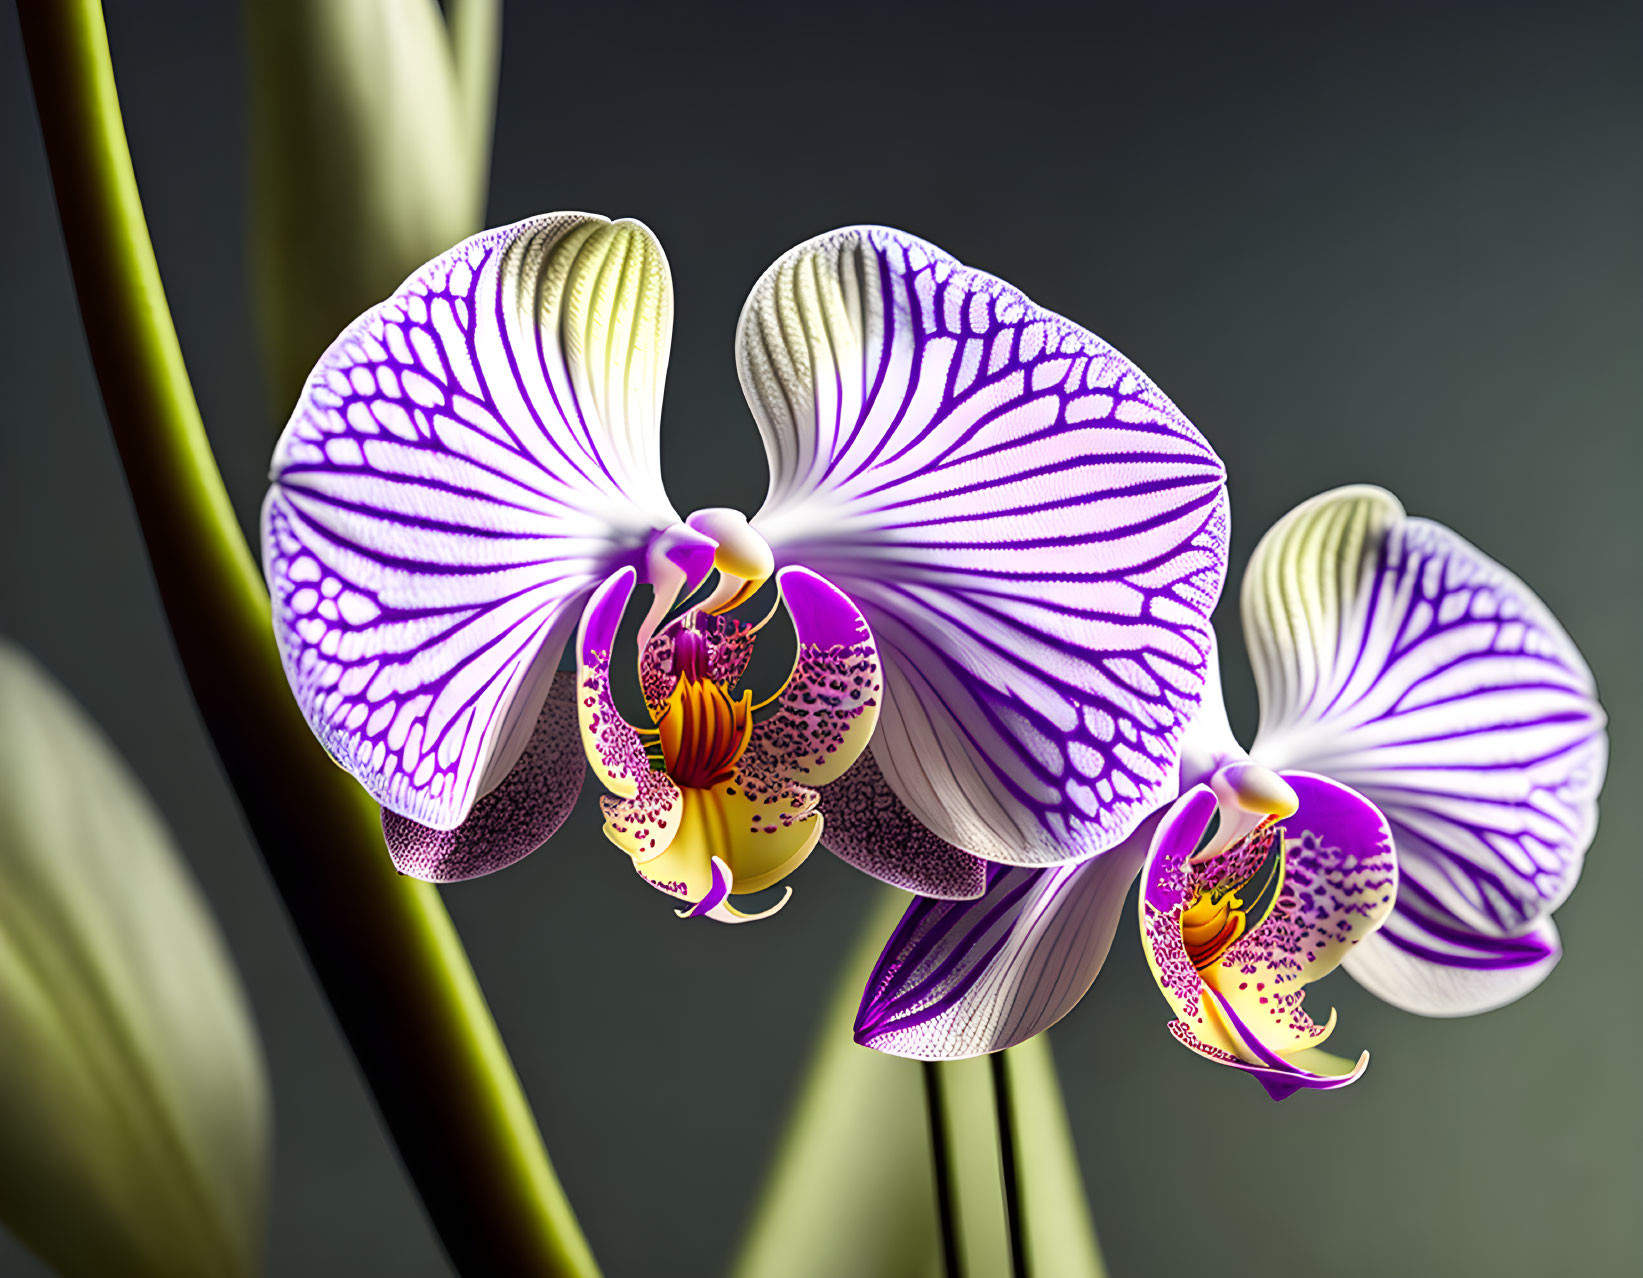 Three vibrant purple and white striped orchid flowers on soft-focus background